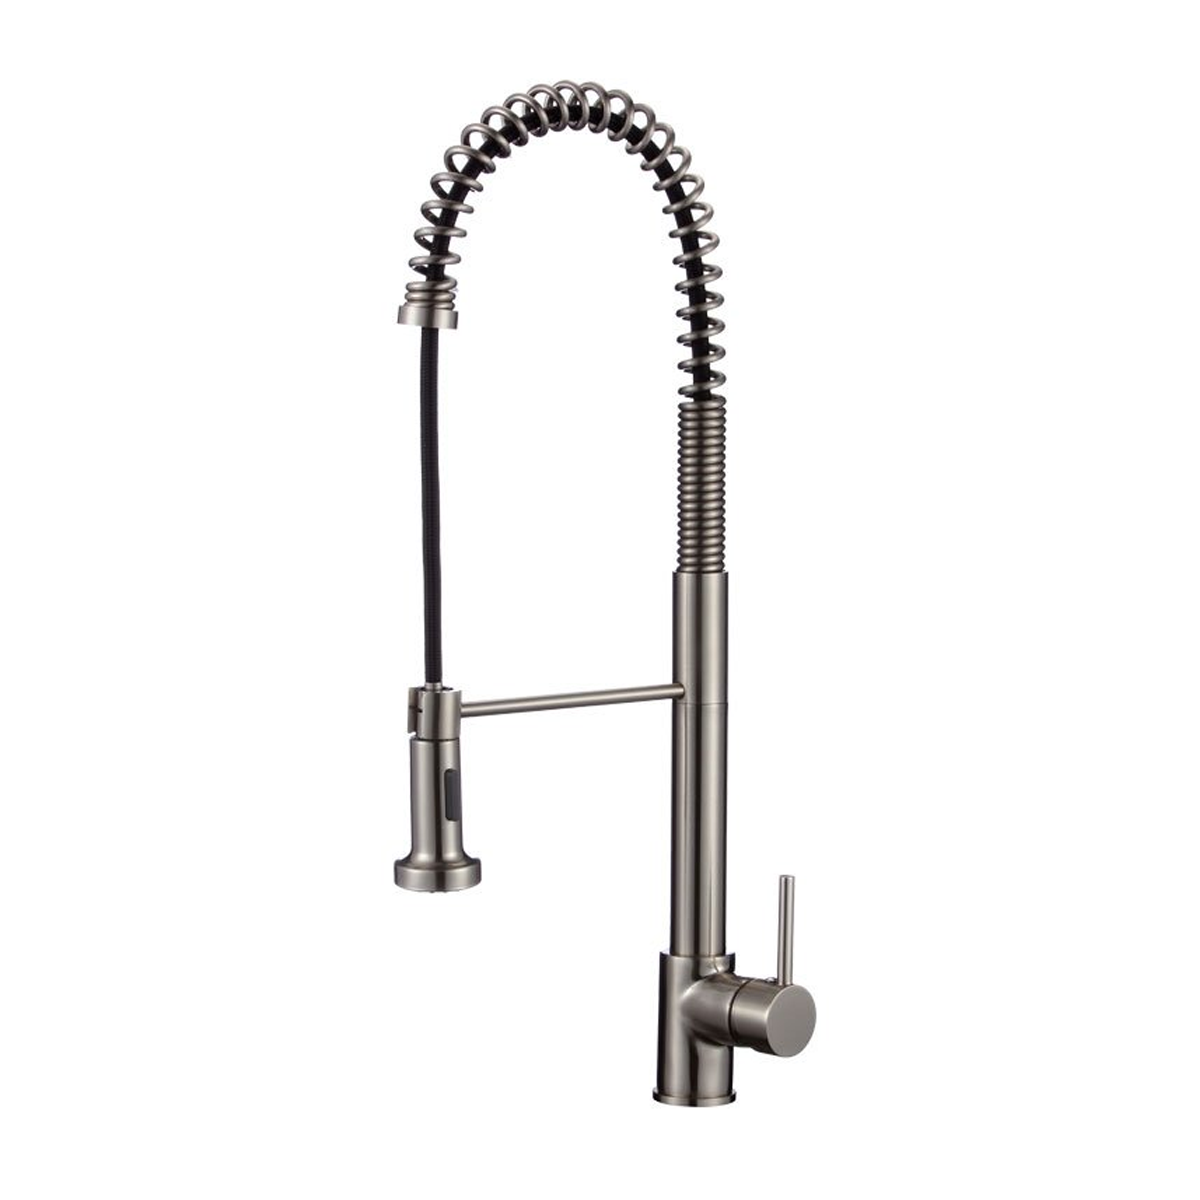 Pelican Int'l Fountain Series PL-8207 Brushed Nickel Single Hole Commercial Style Pull Down Kitchen Faucet